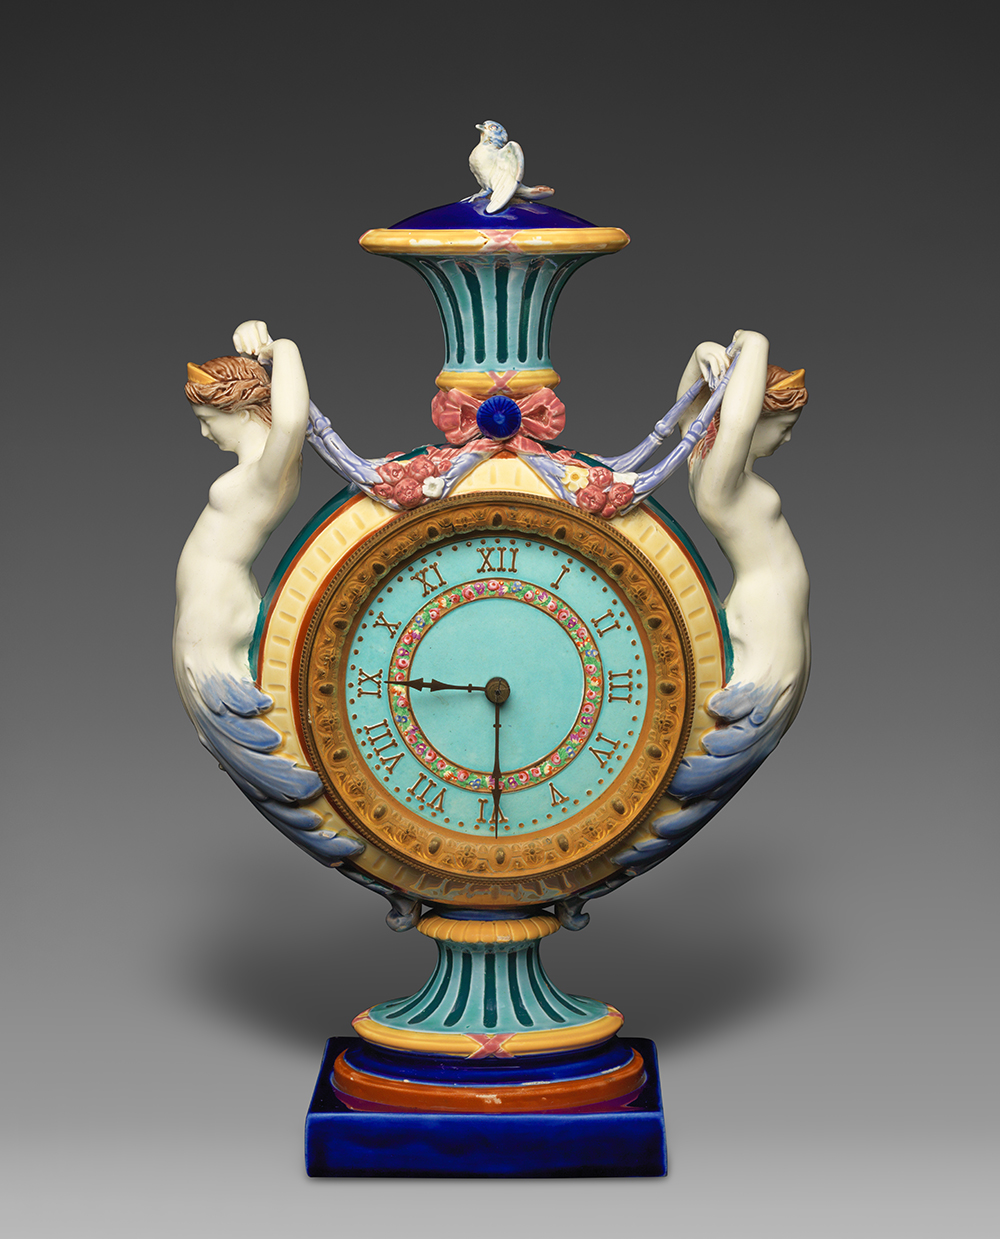 Majolica clock vase with two mermaid figures and bird finial. Color palette of turquoise, dark blue, yellow, white, brown, and red.